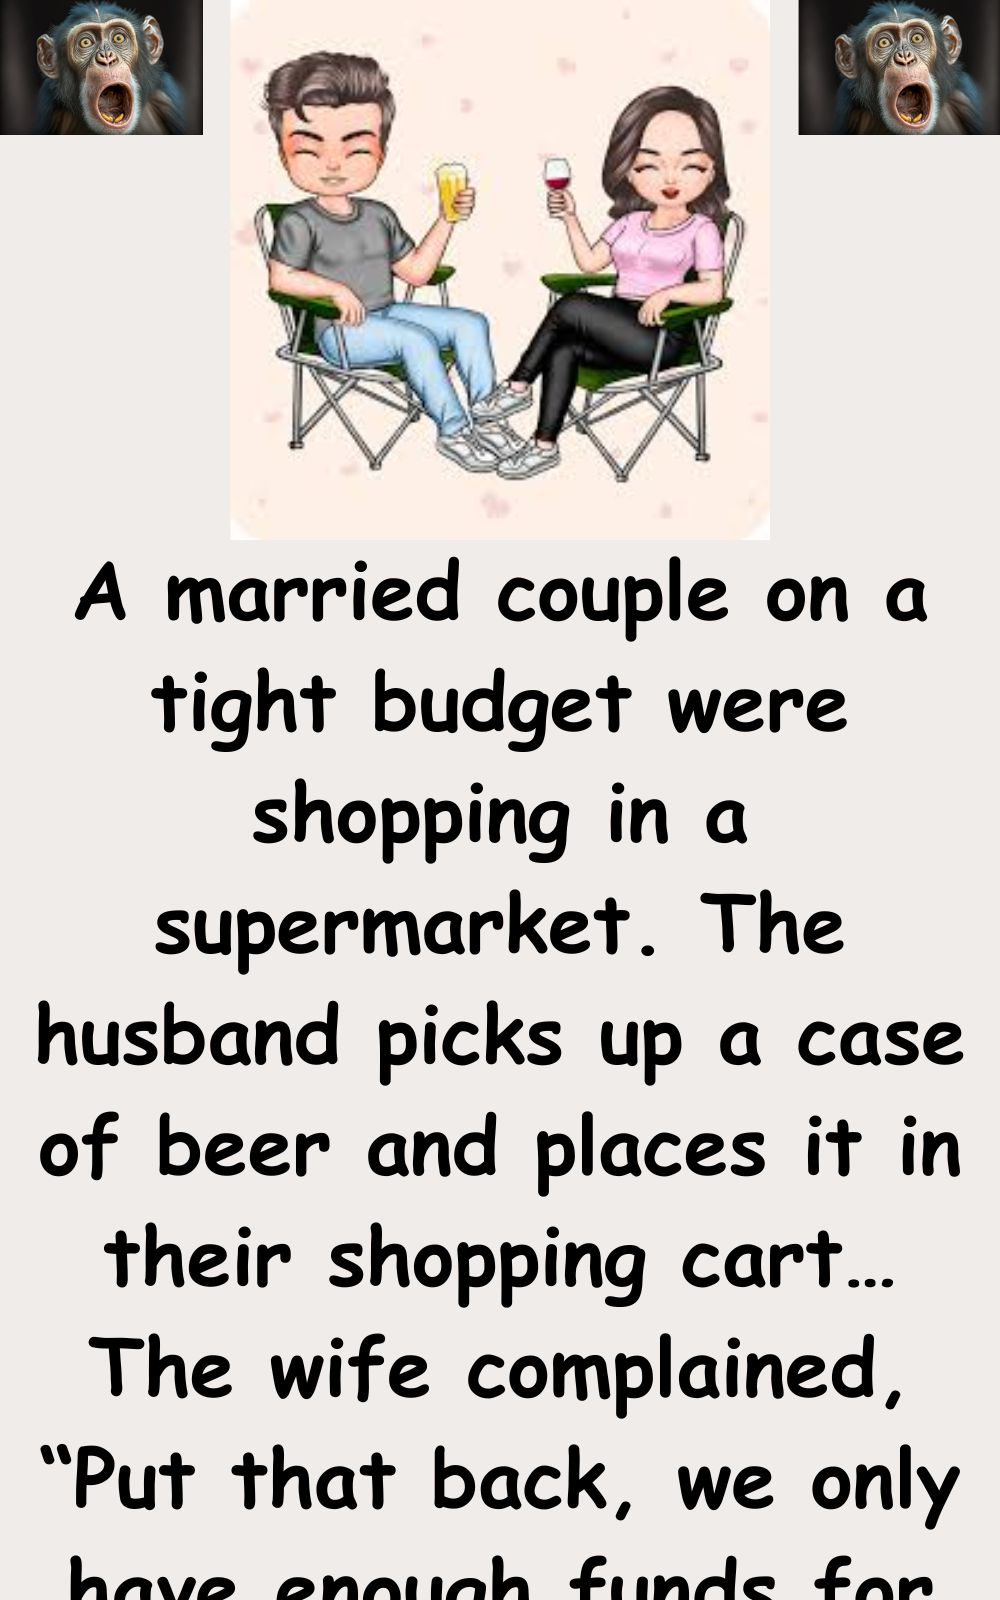 A married couple on a tight budget